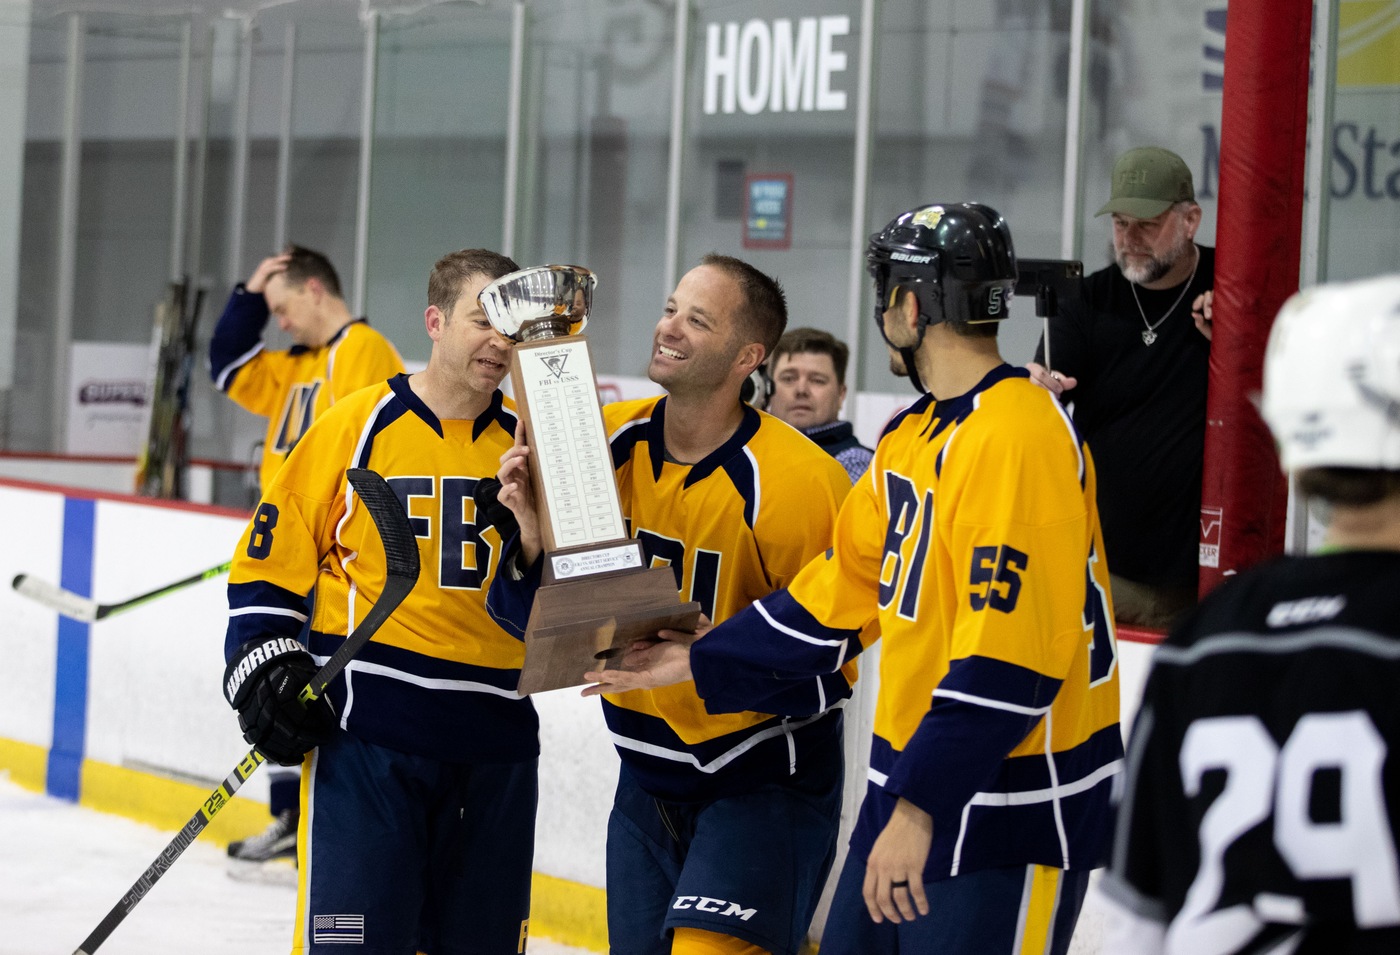 The FBI hockey team accepts a trophy after defeating the U.S. Secret Service team on April 30, 2022. 